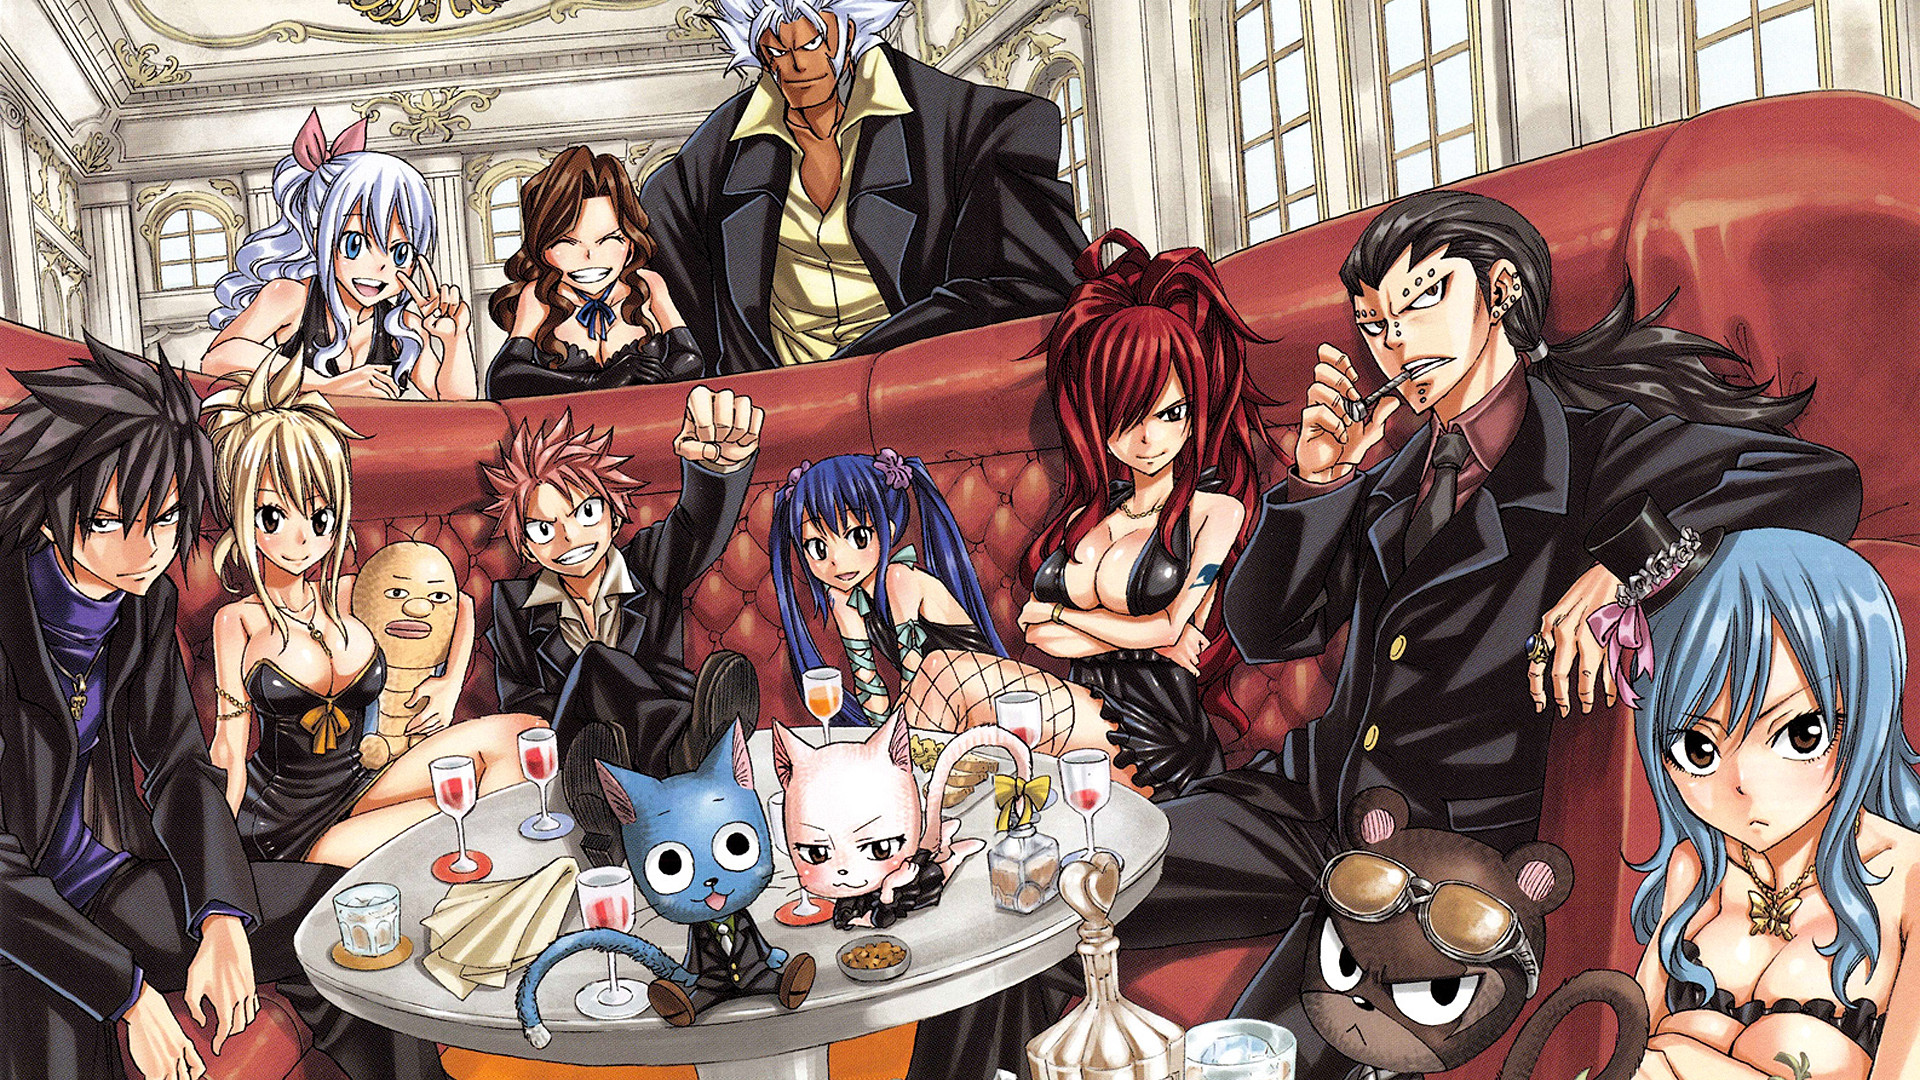 1920x1080 Anime - Fairy Tail Gray Fullbuster Panther Lily (Fairy Tail) Gajeel Redfox  Cana Alberona